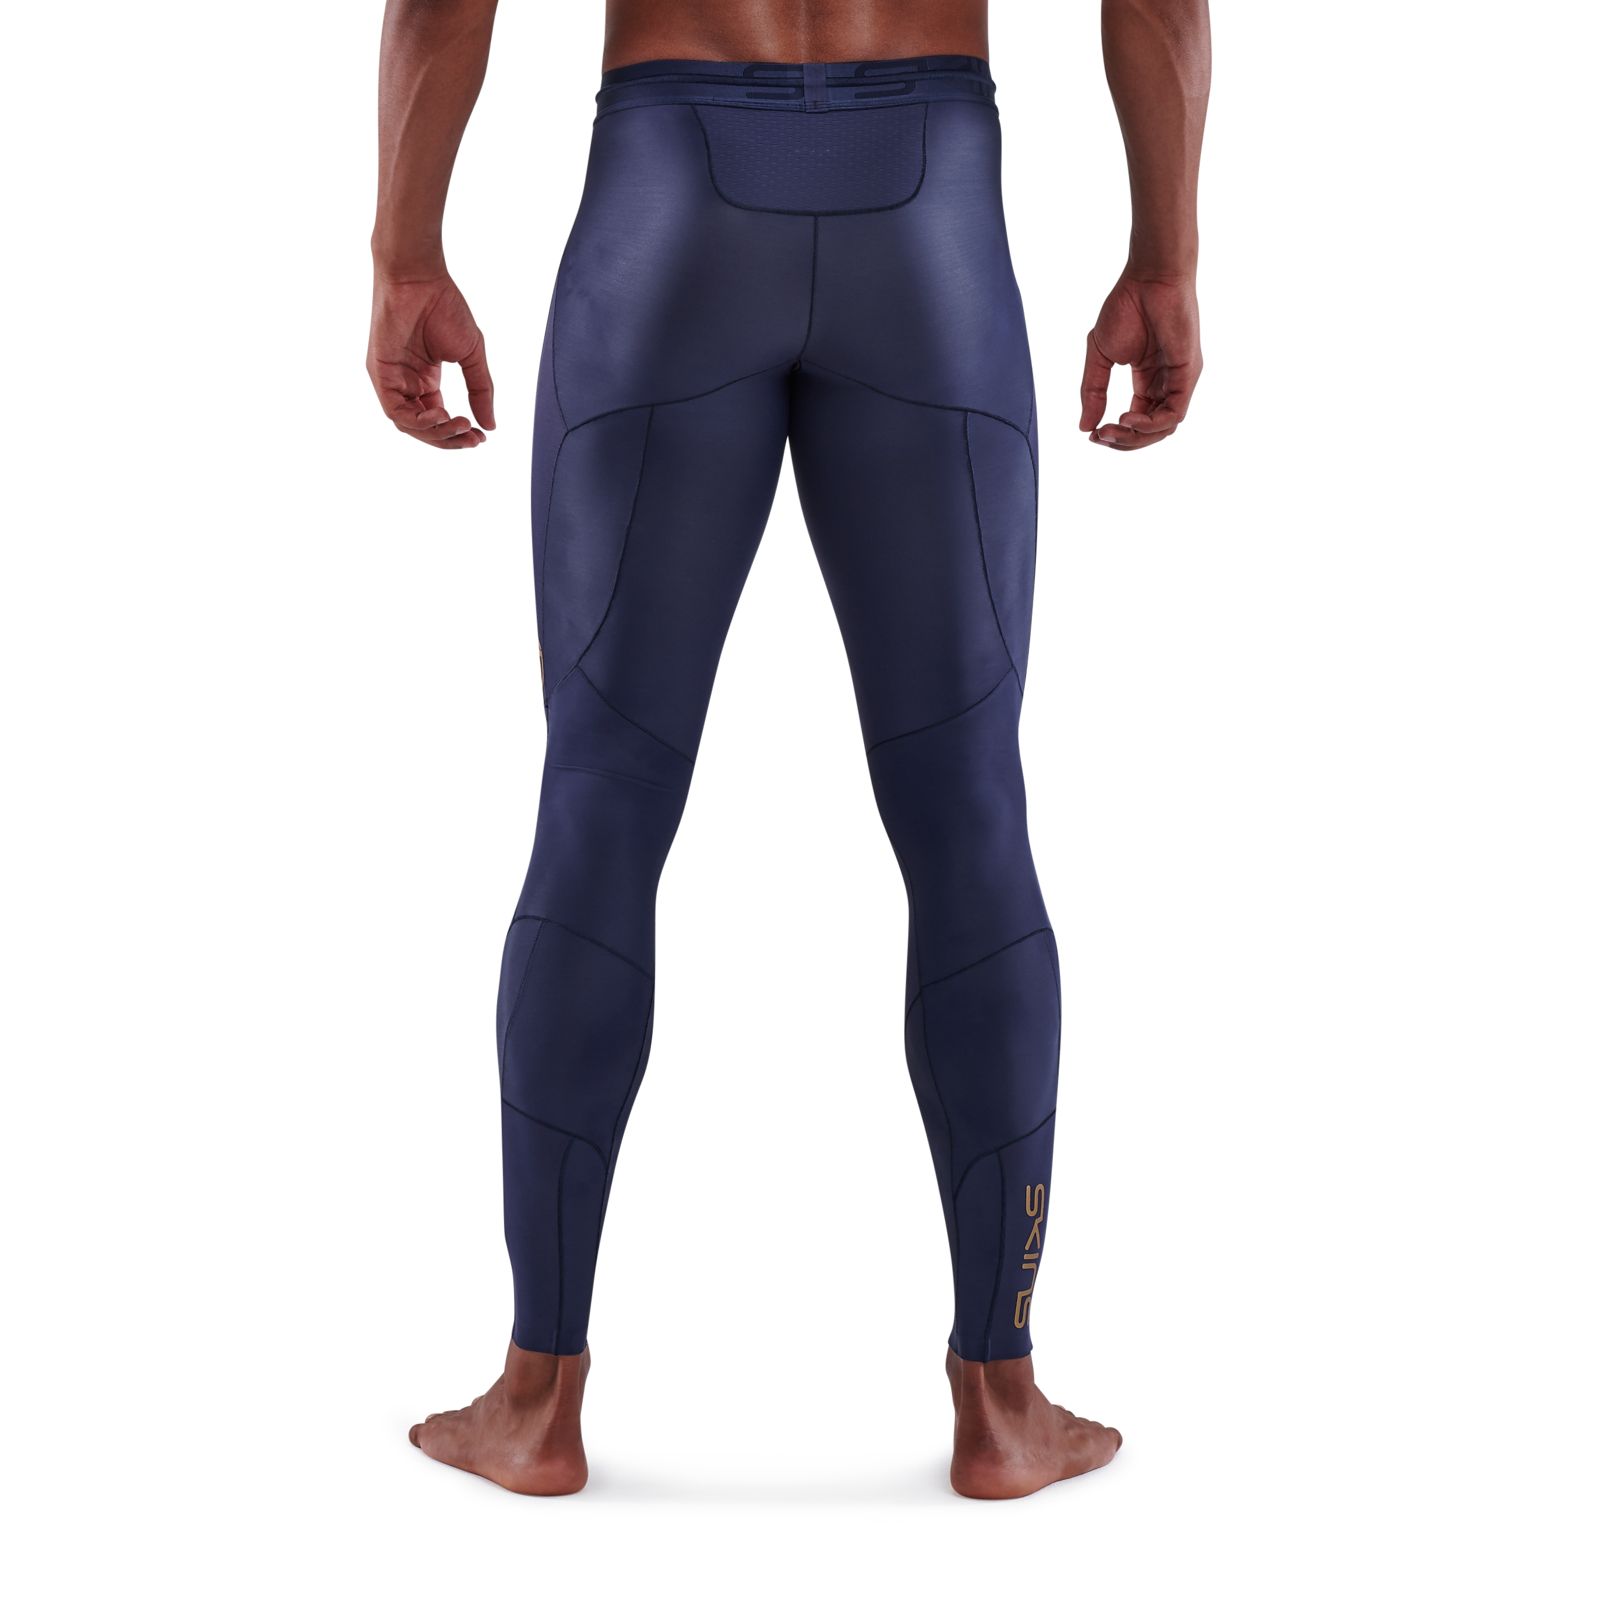 SKINS COMPRESSION Series-5 Men's Long Black Tights Small